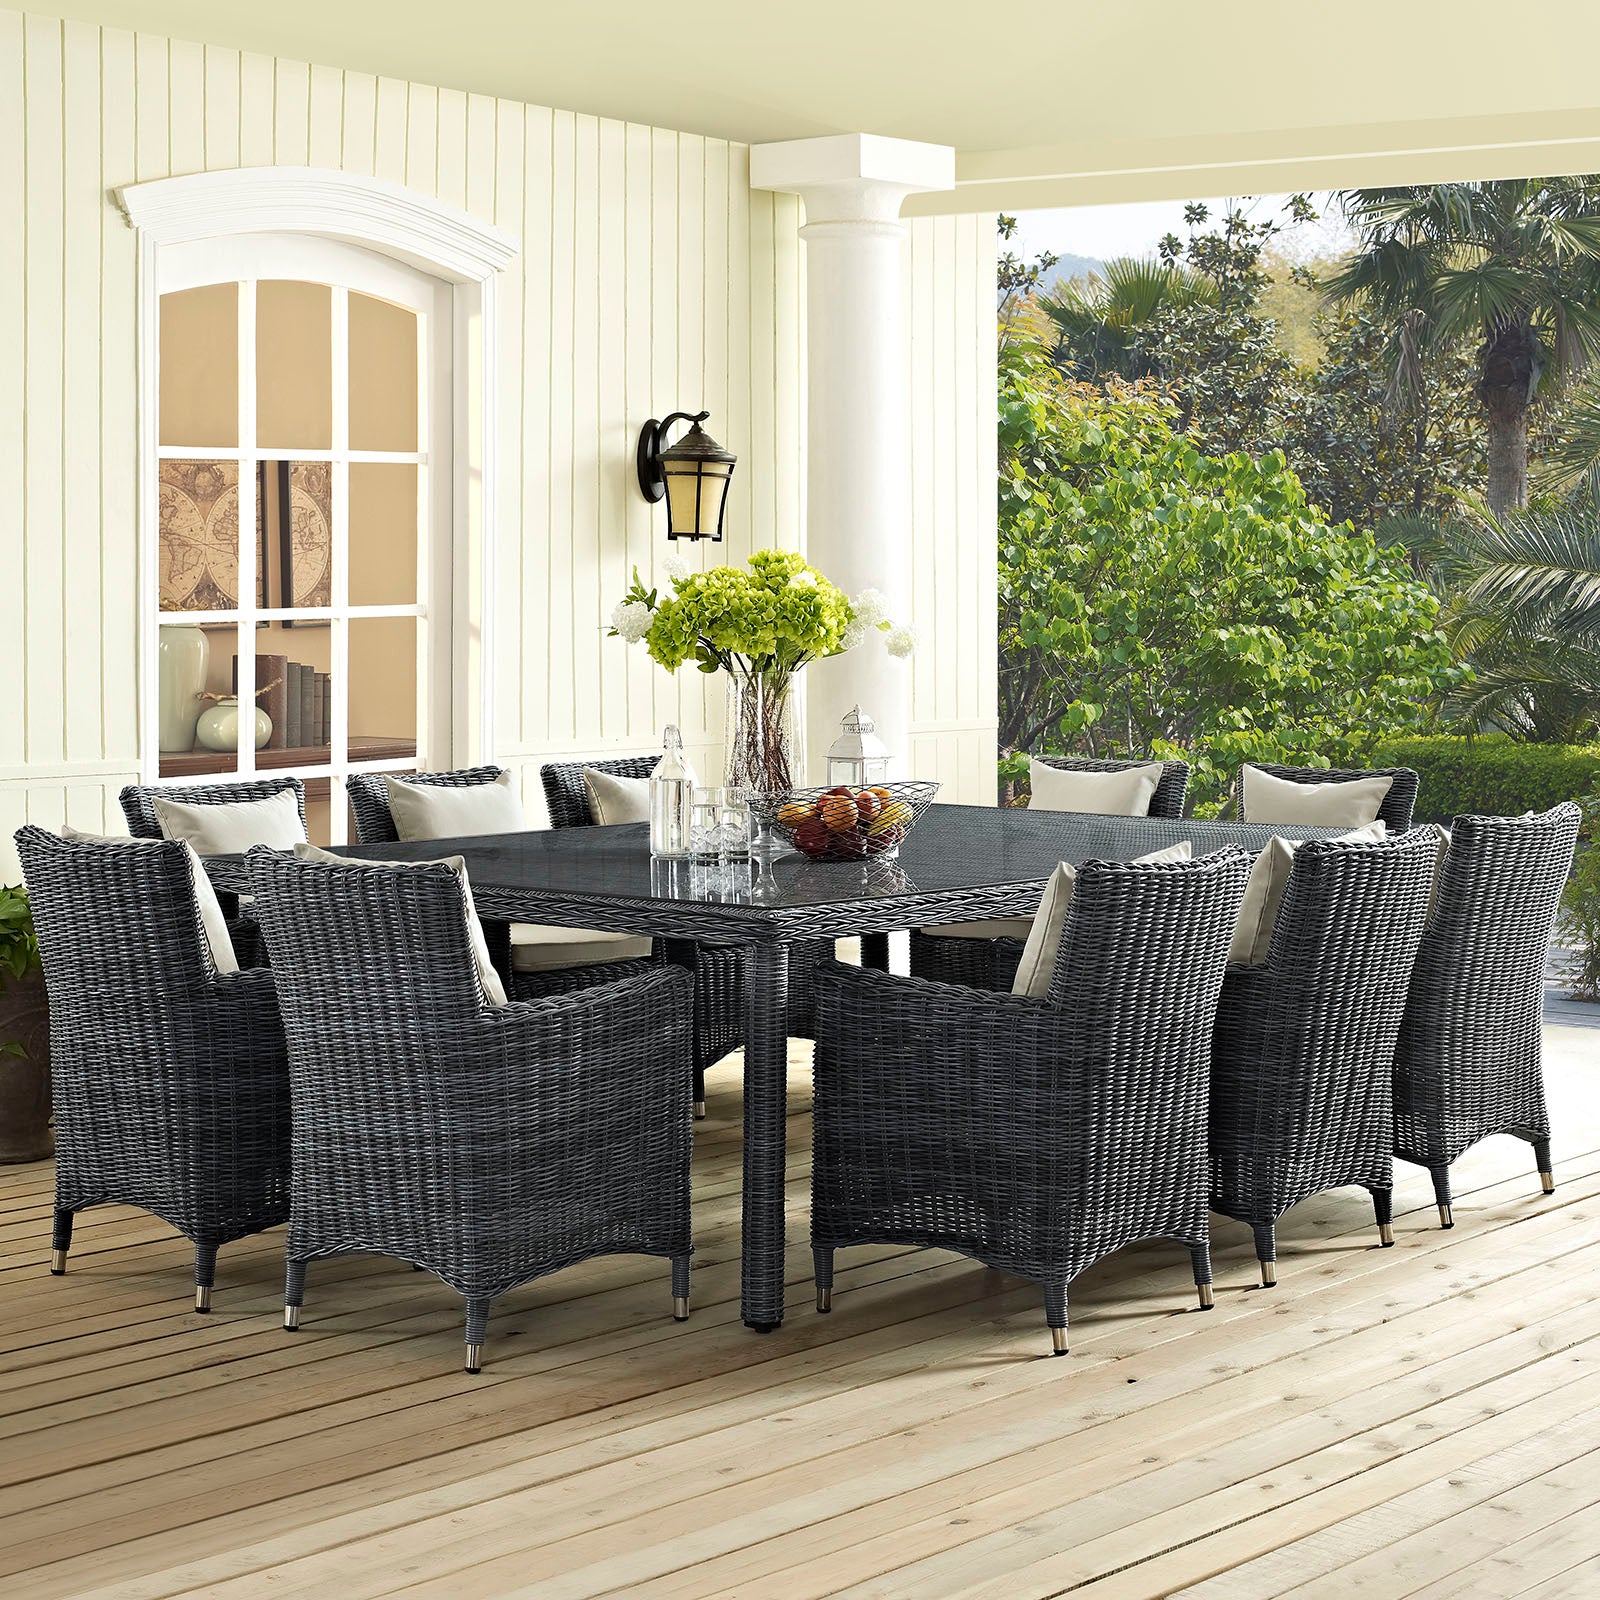 Summon 90" Outdoor Patio Dining Table - East Shore Modern Home Furnishings